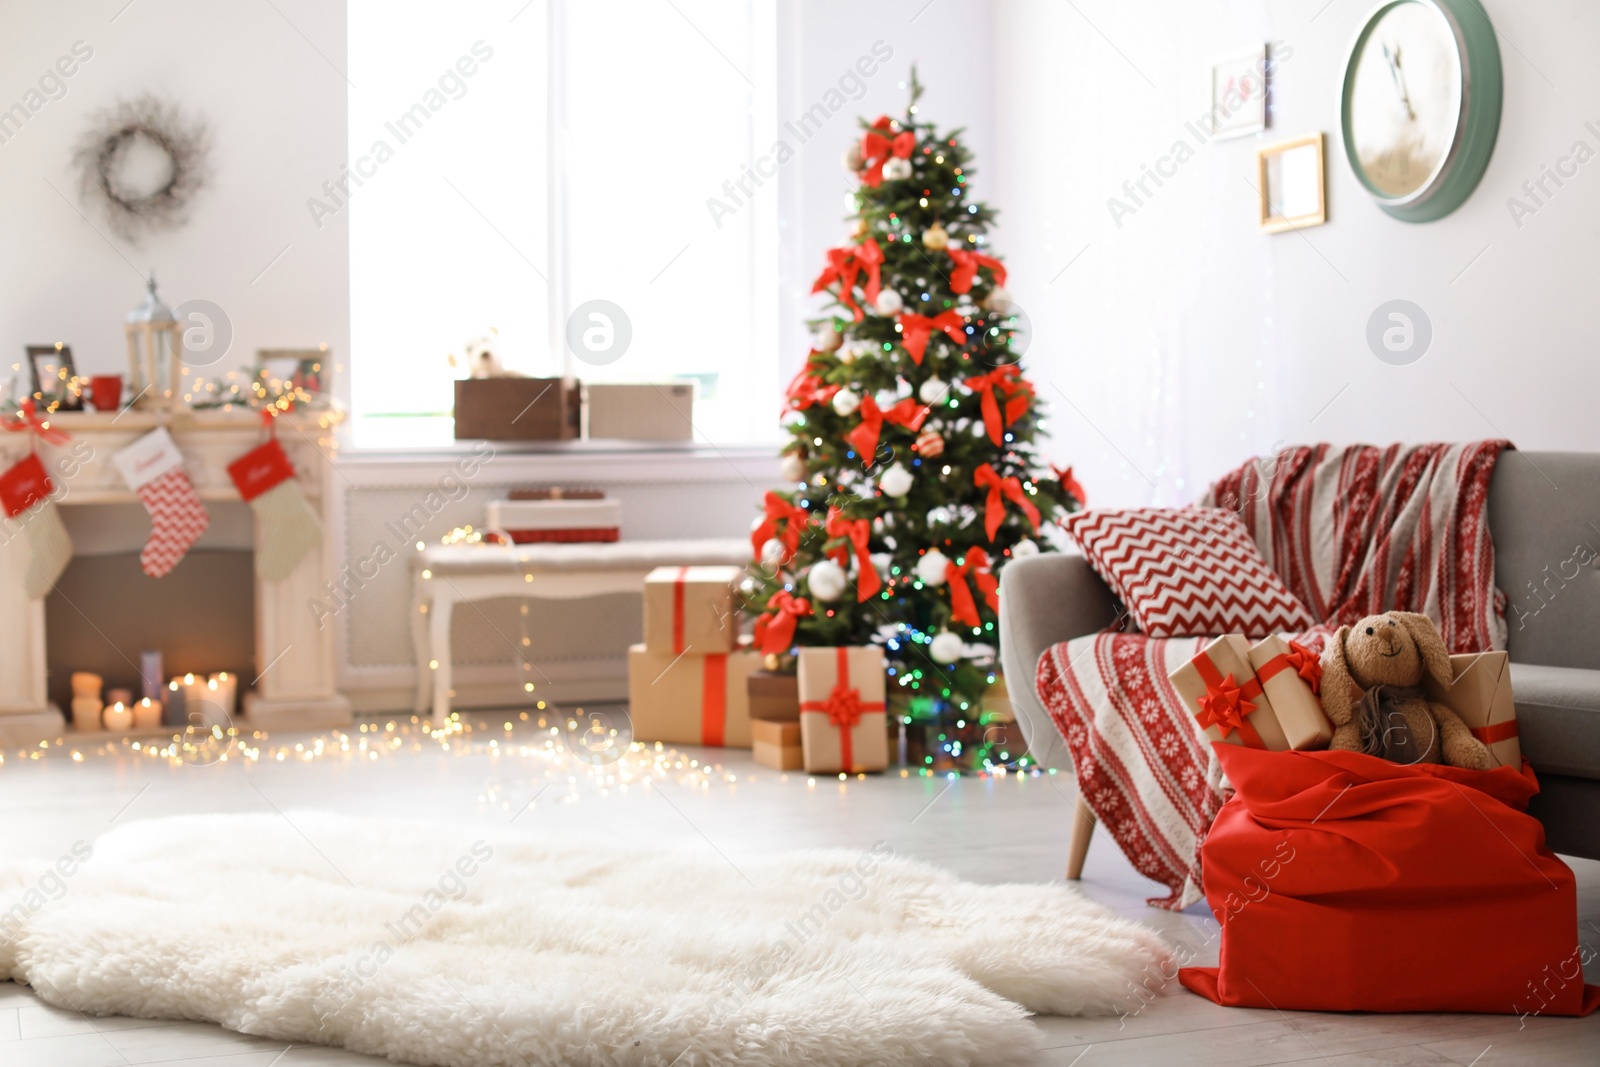 Photo of Room interior with Christmas tree and Santa's bag of gifts